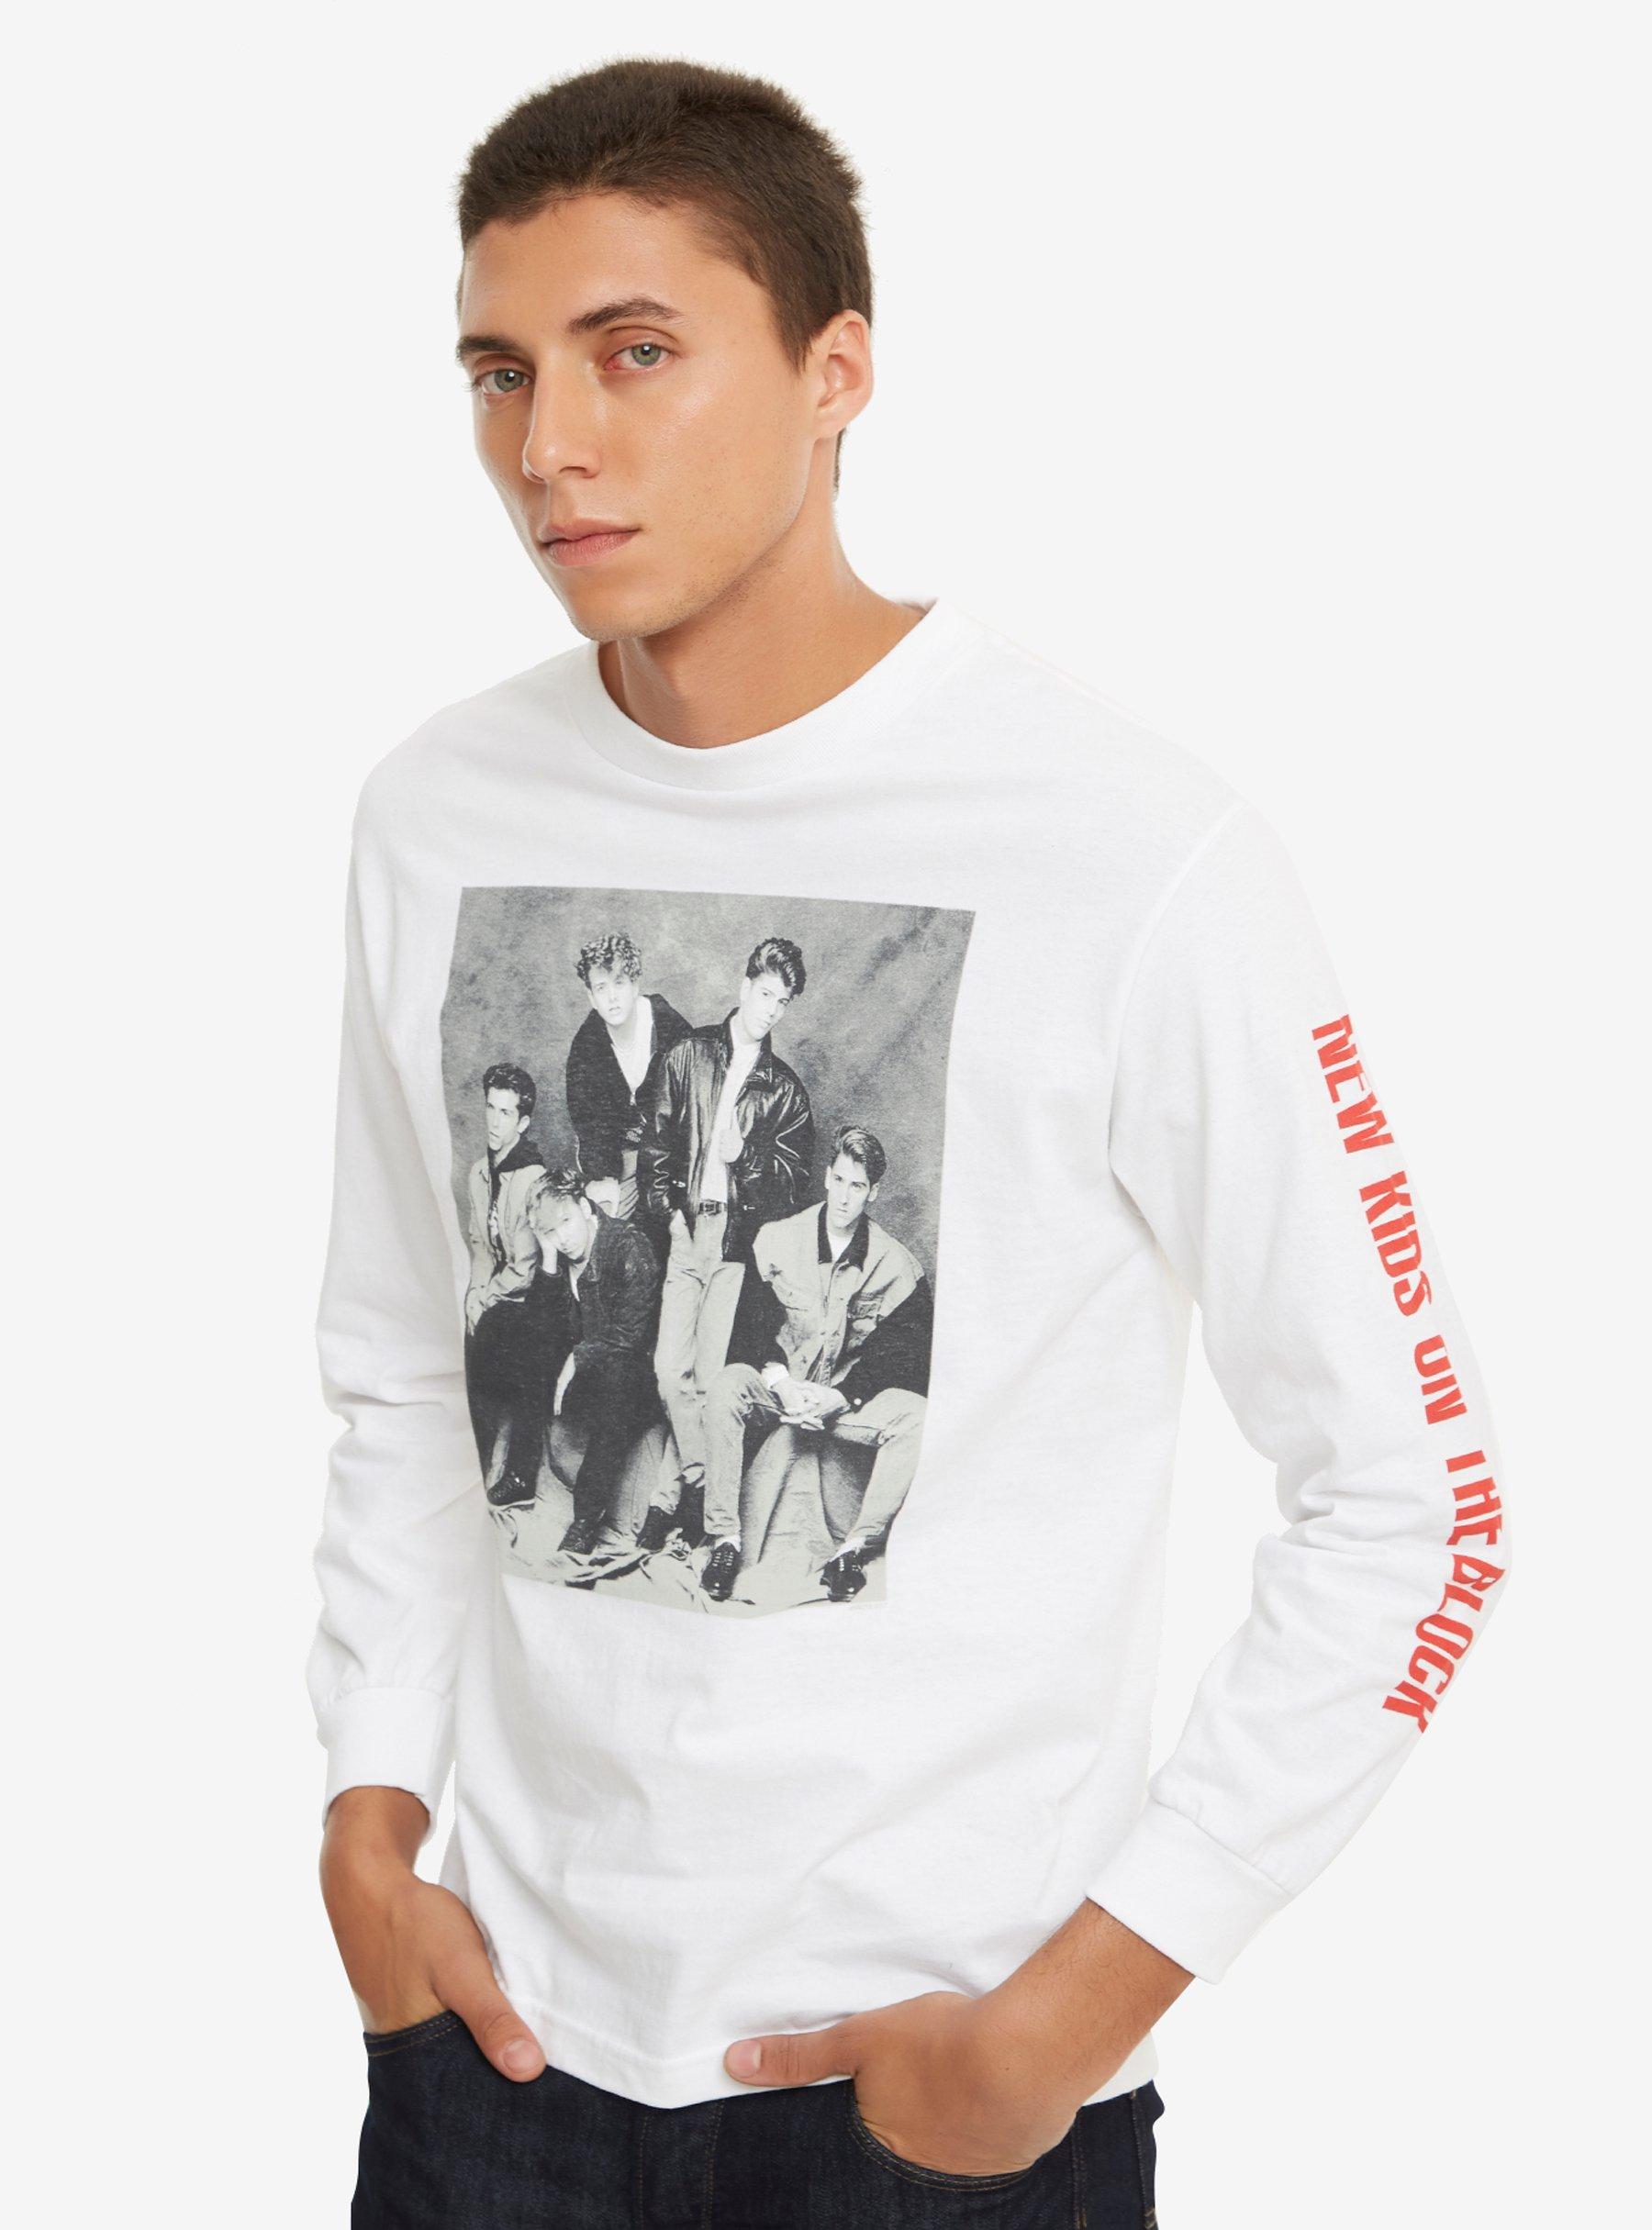 New Kids On The Block The Total Package Tour Long-Sleeve T-Shirt, WHITE, hi-res